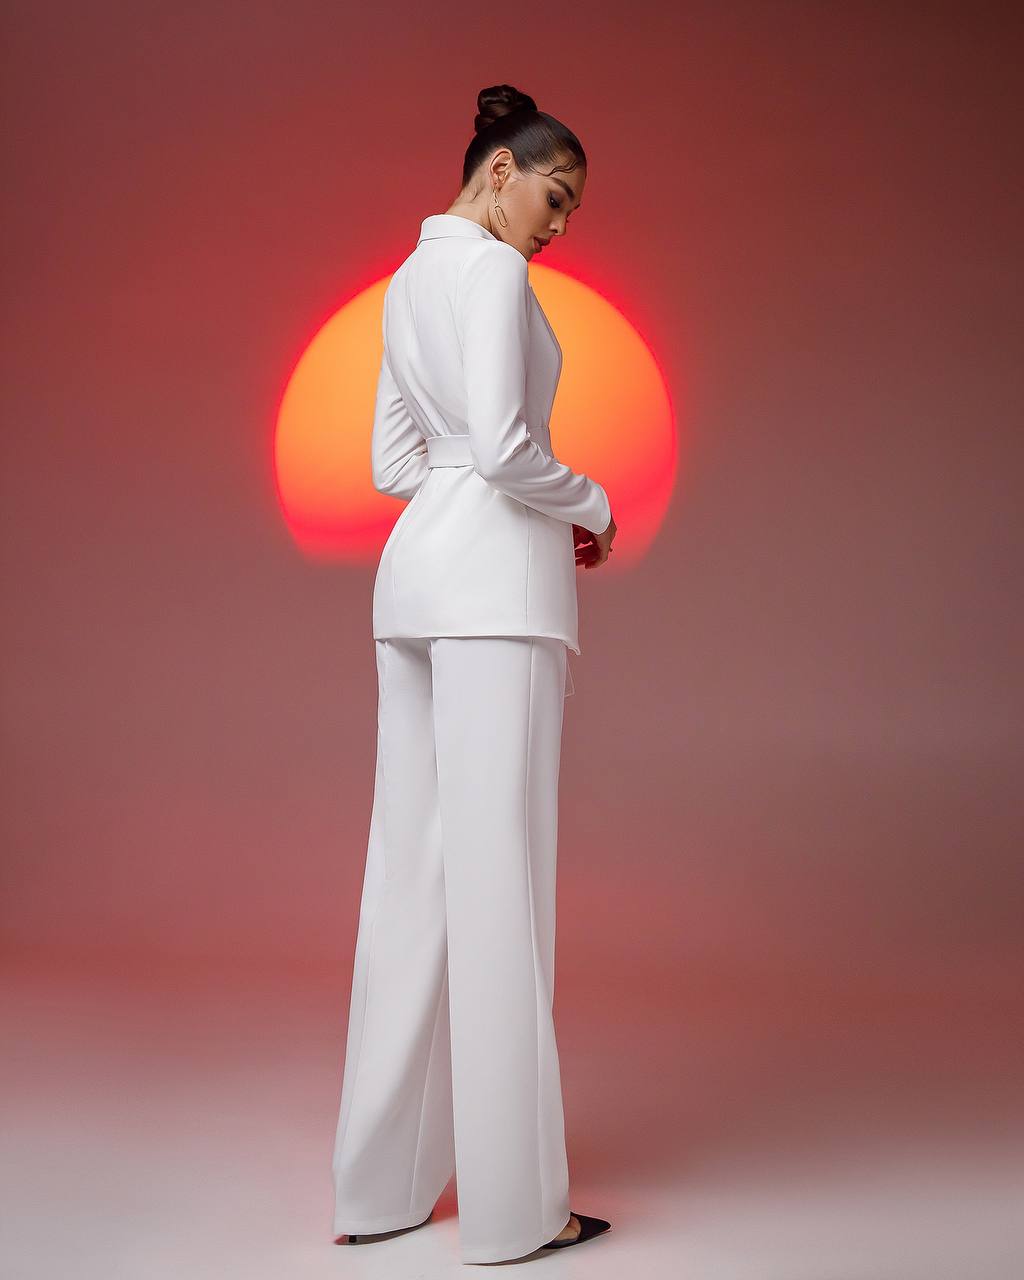 a woman in a white suit standing in front of a red sun